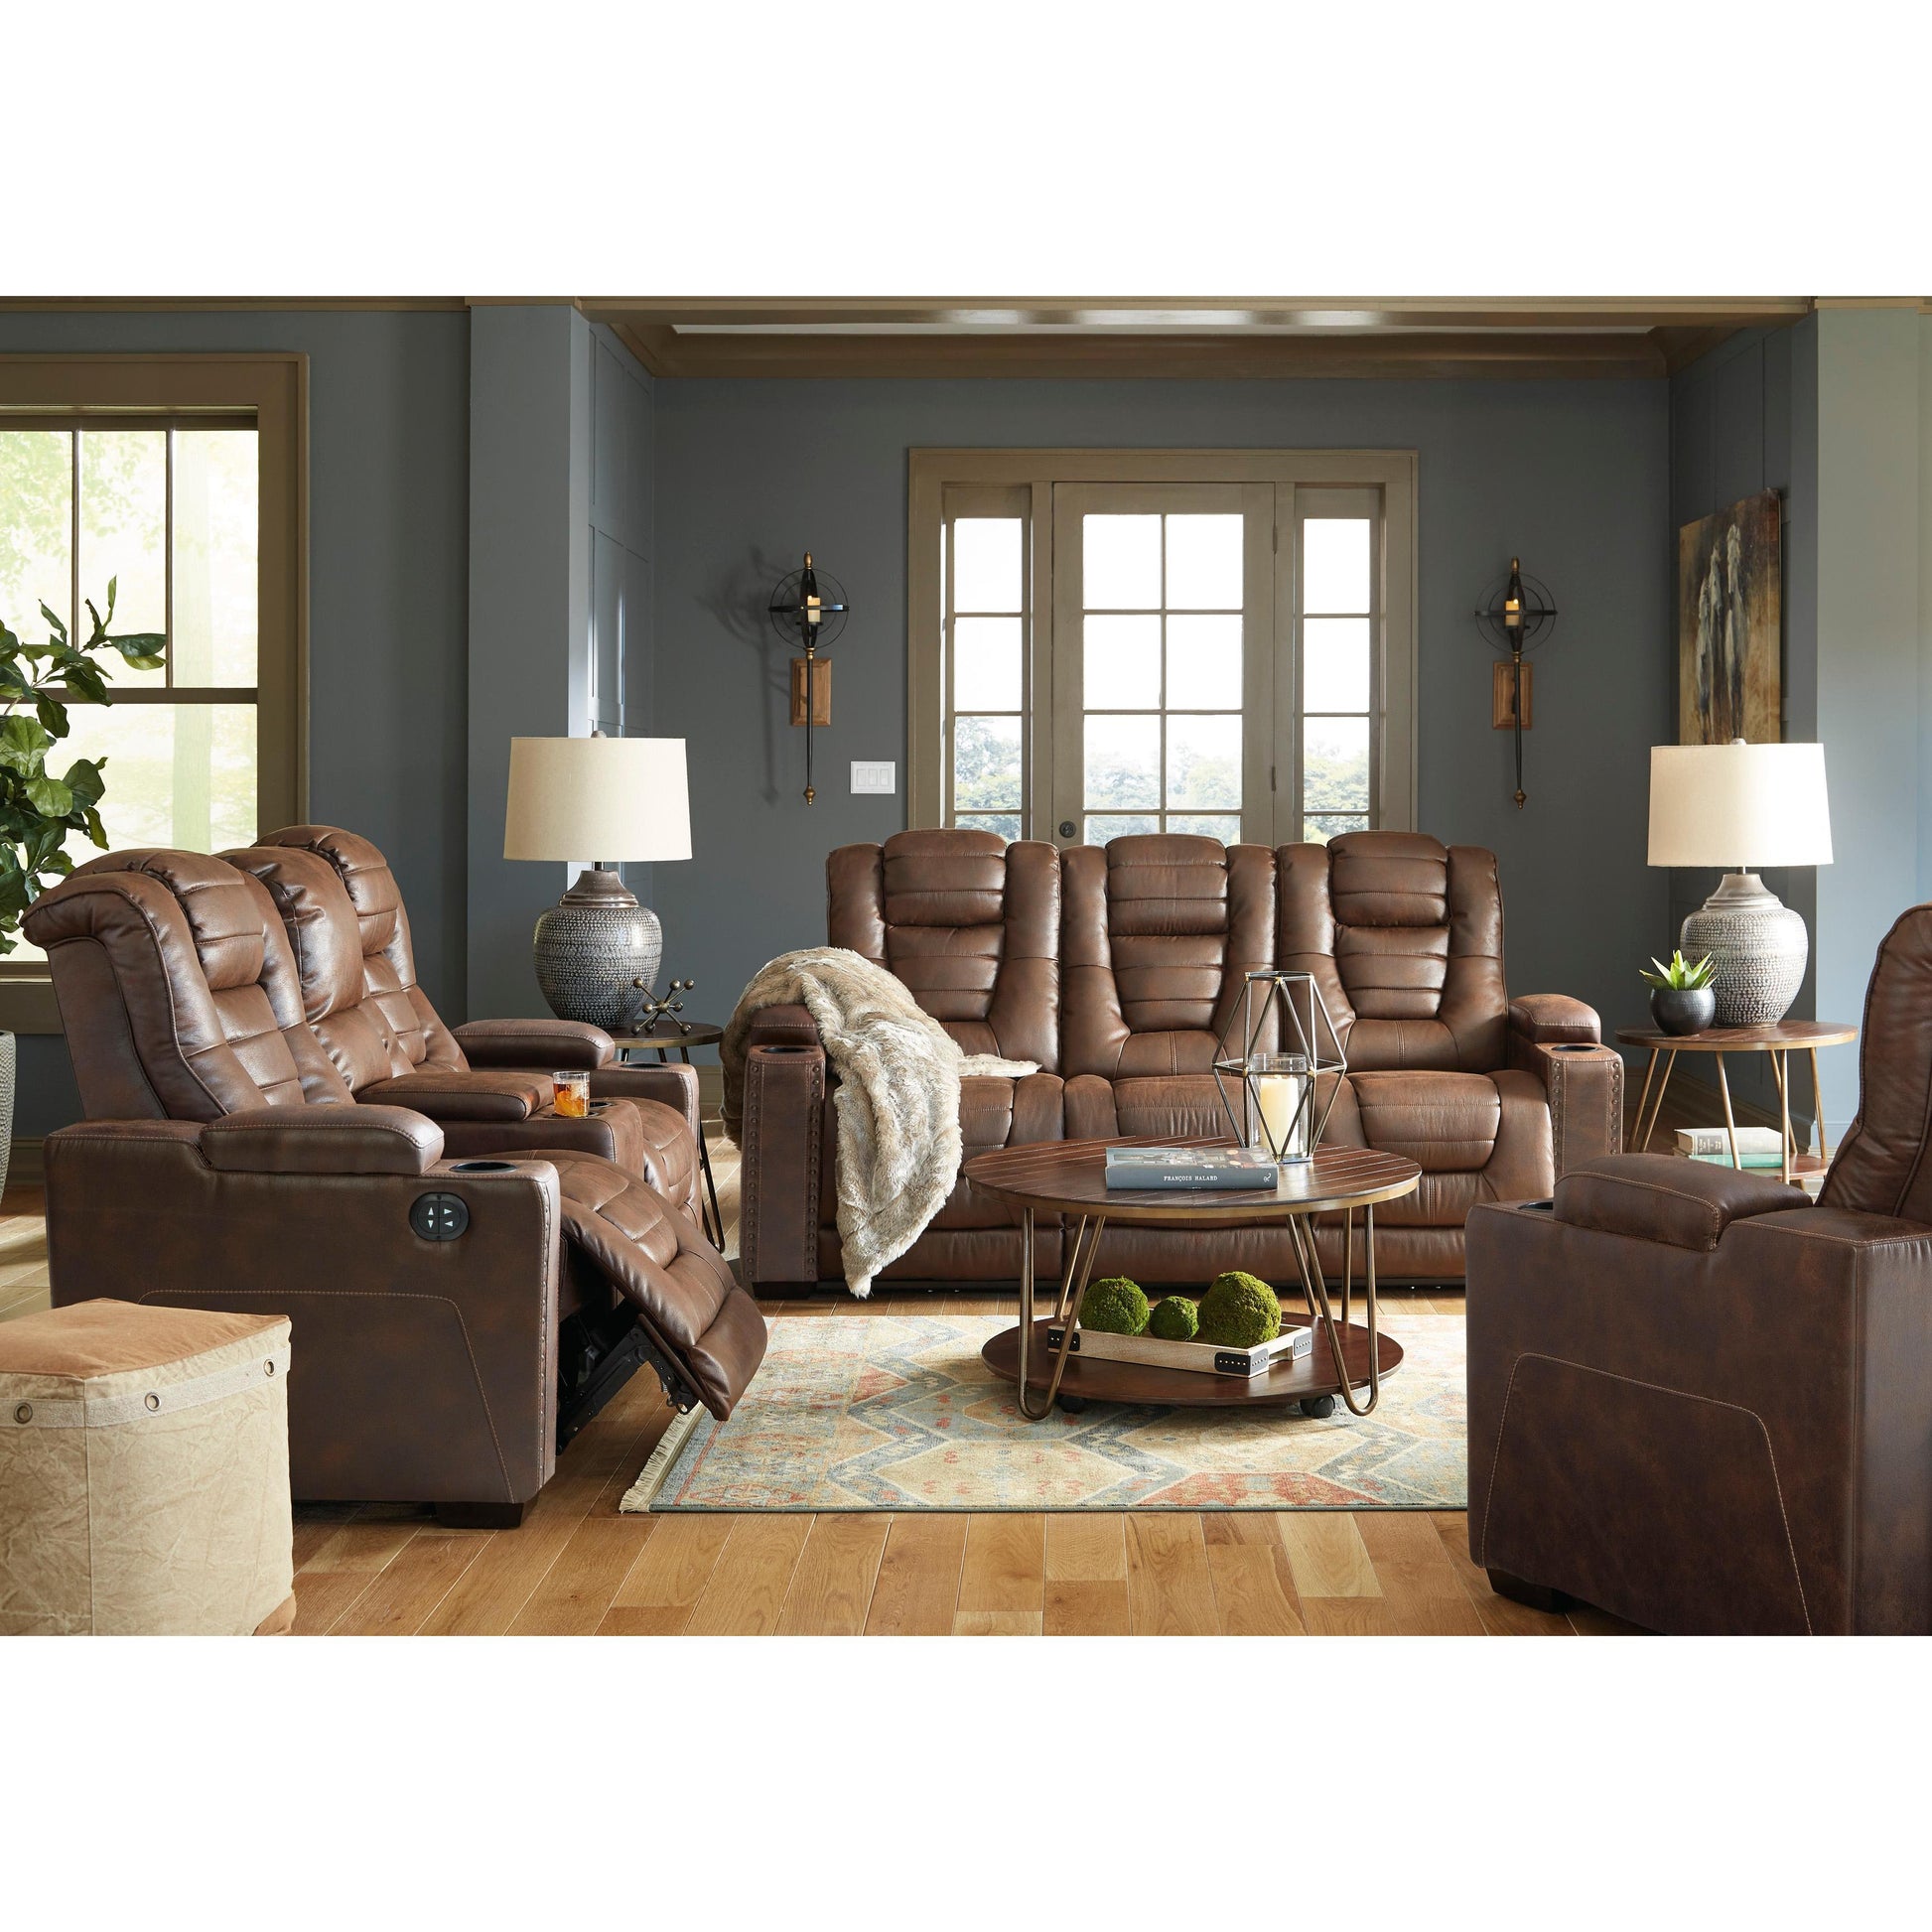 Signature Design by Ashley Owner's Box Power Reclining Leather Look Loveseat 2450518